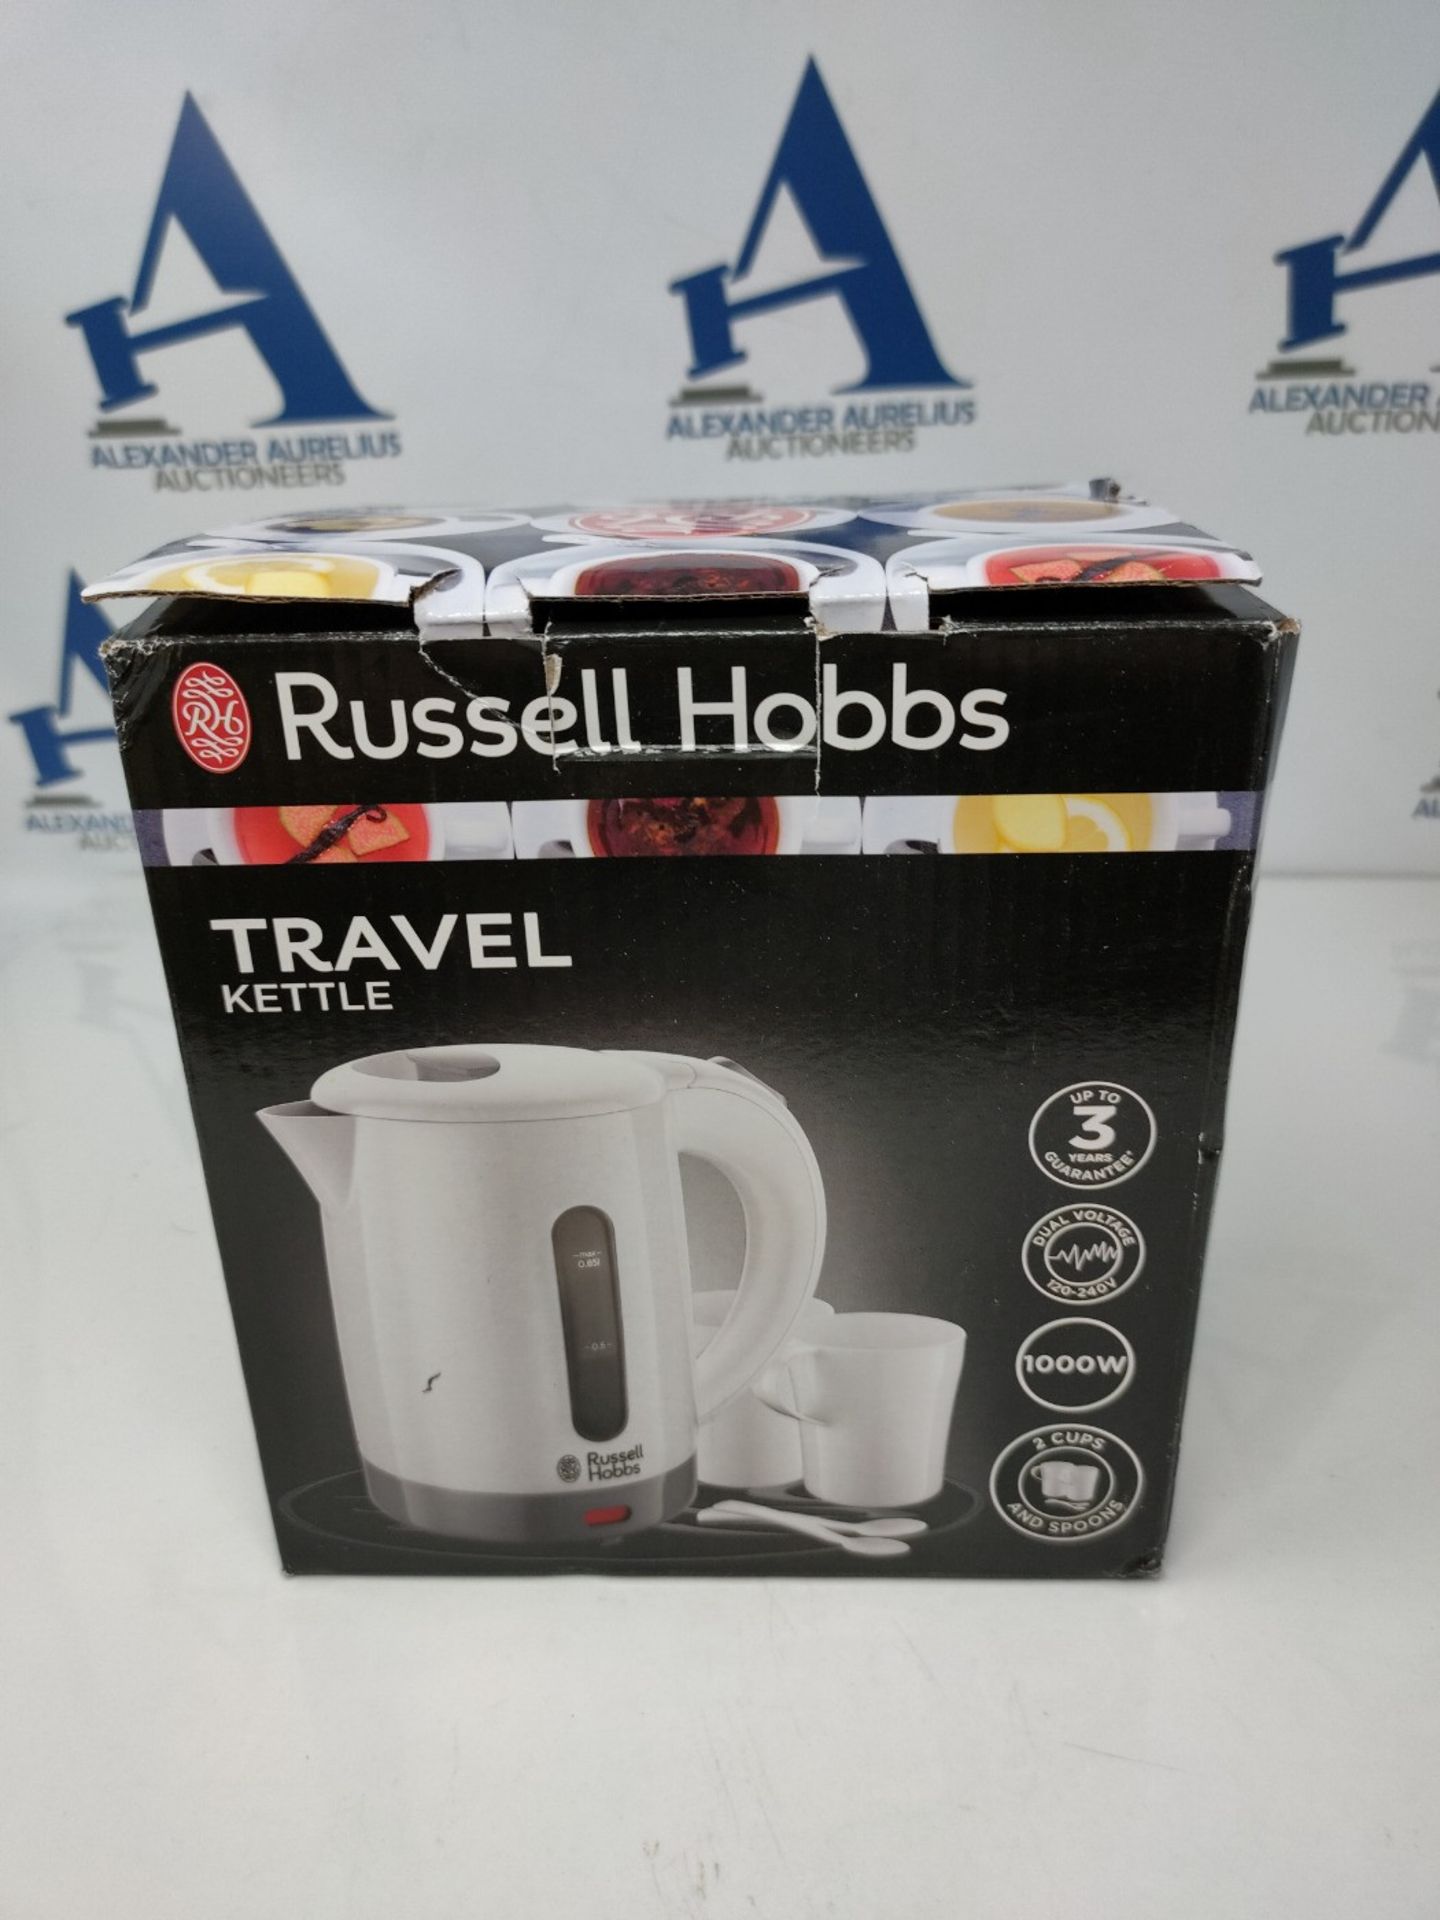 Russell Hobbs 23840 Compact Travel Electric Kettle, Plastic, 1000 W, White - Image 2 of 3